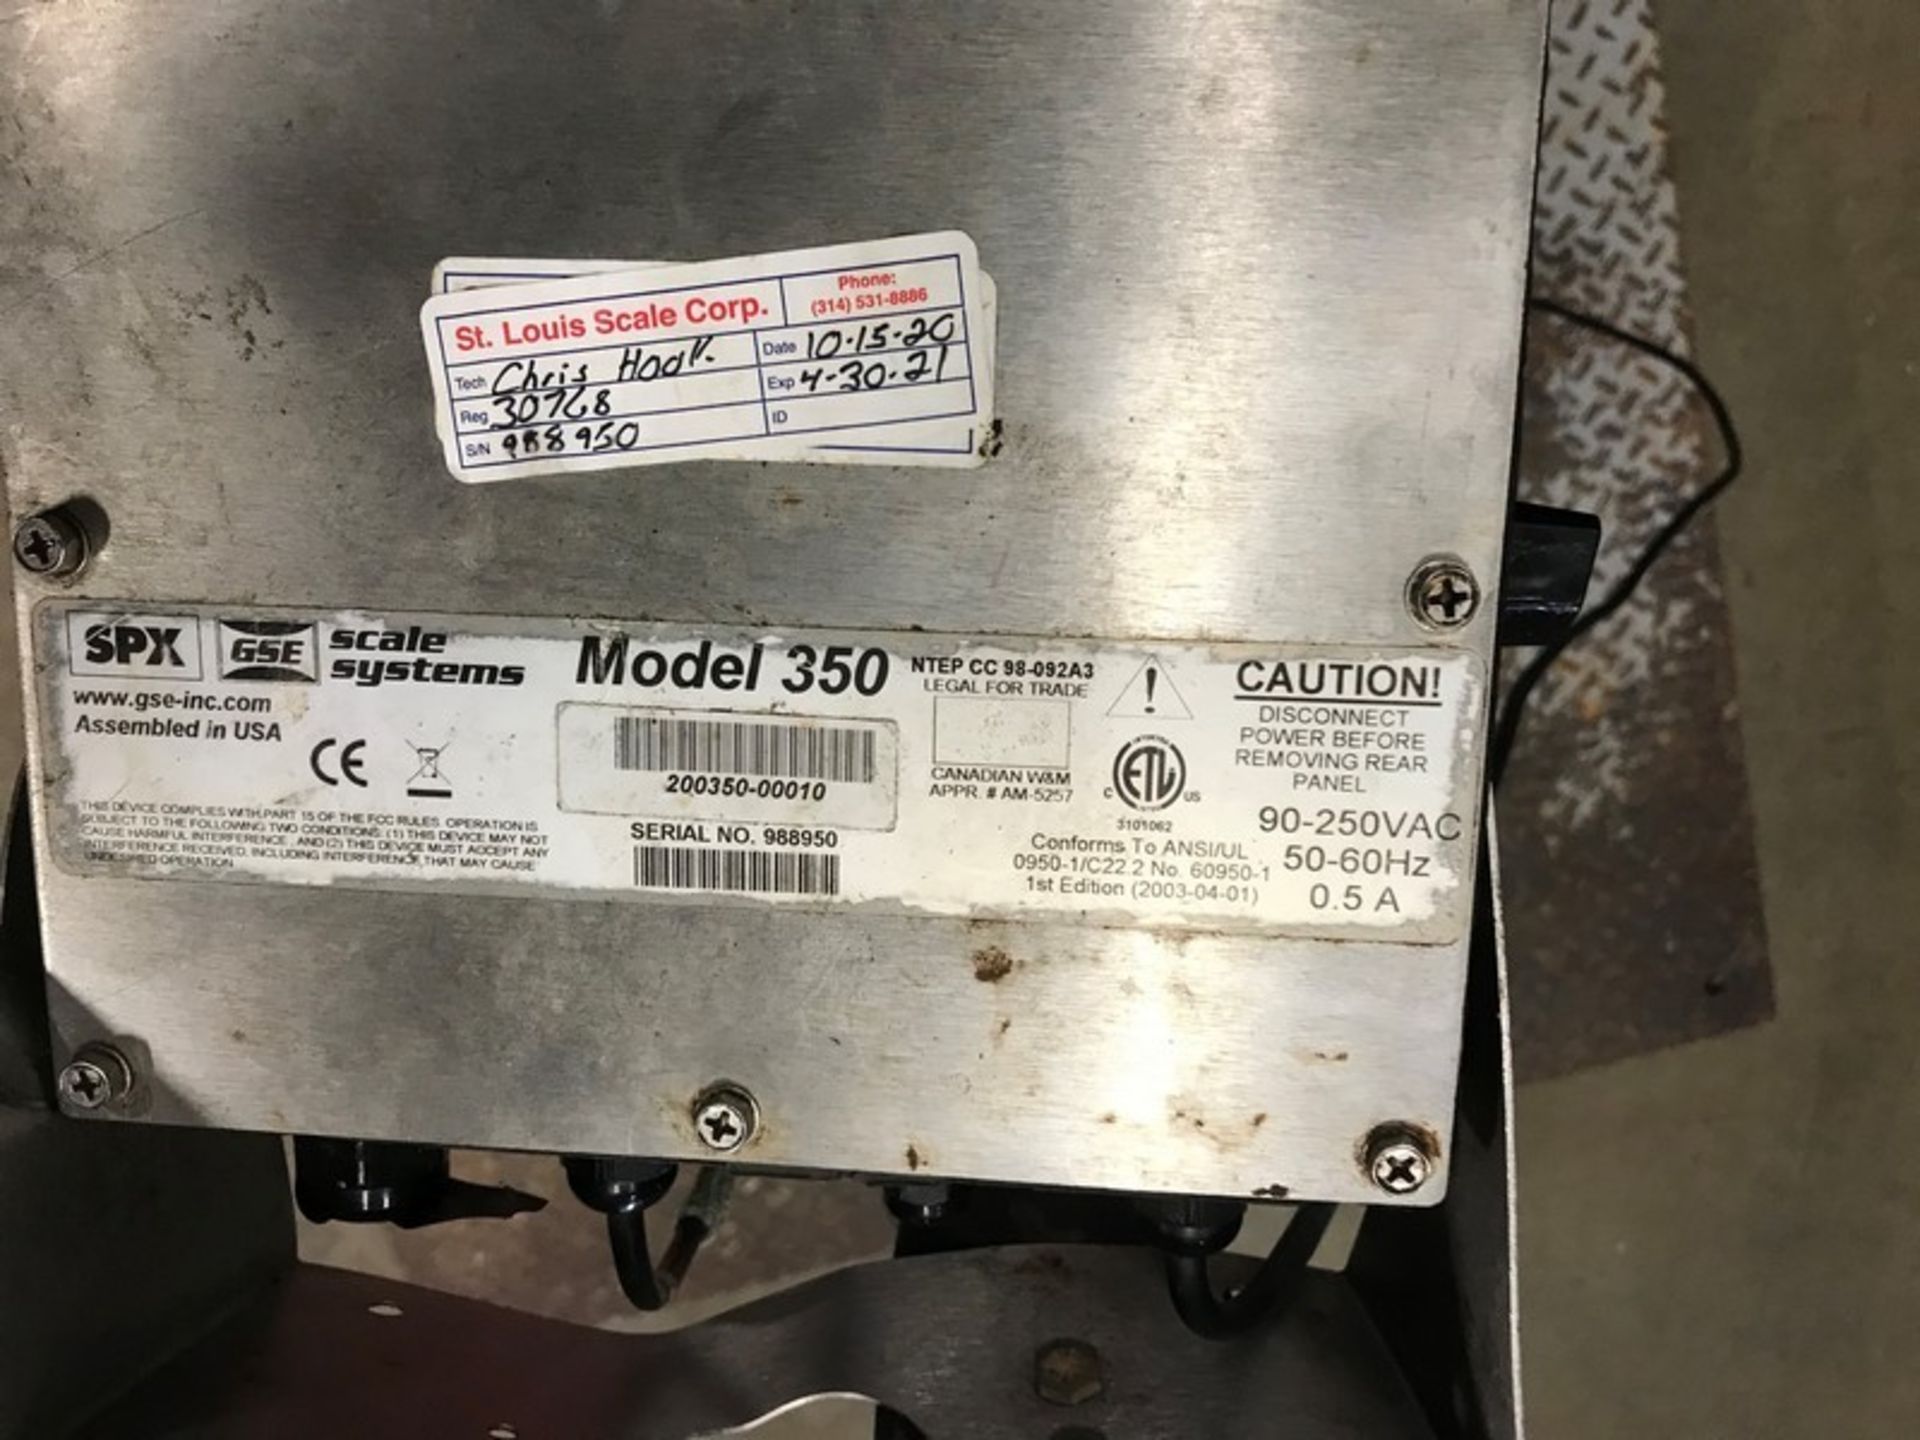 Aprox. 5,000 lb. Capacity Floor Scale with SPX Digital Read-Out, Model 350, S/N 988950 - Bild 2 aus 2